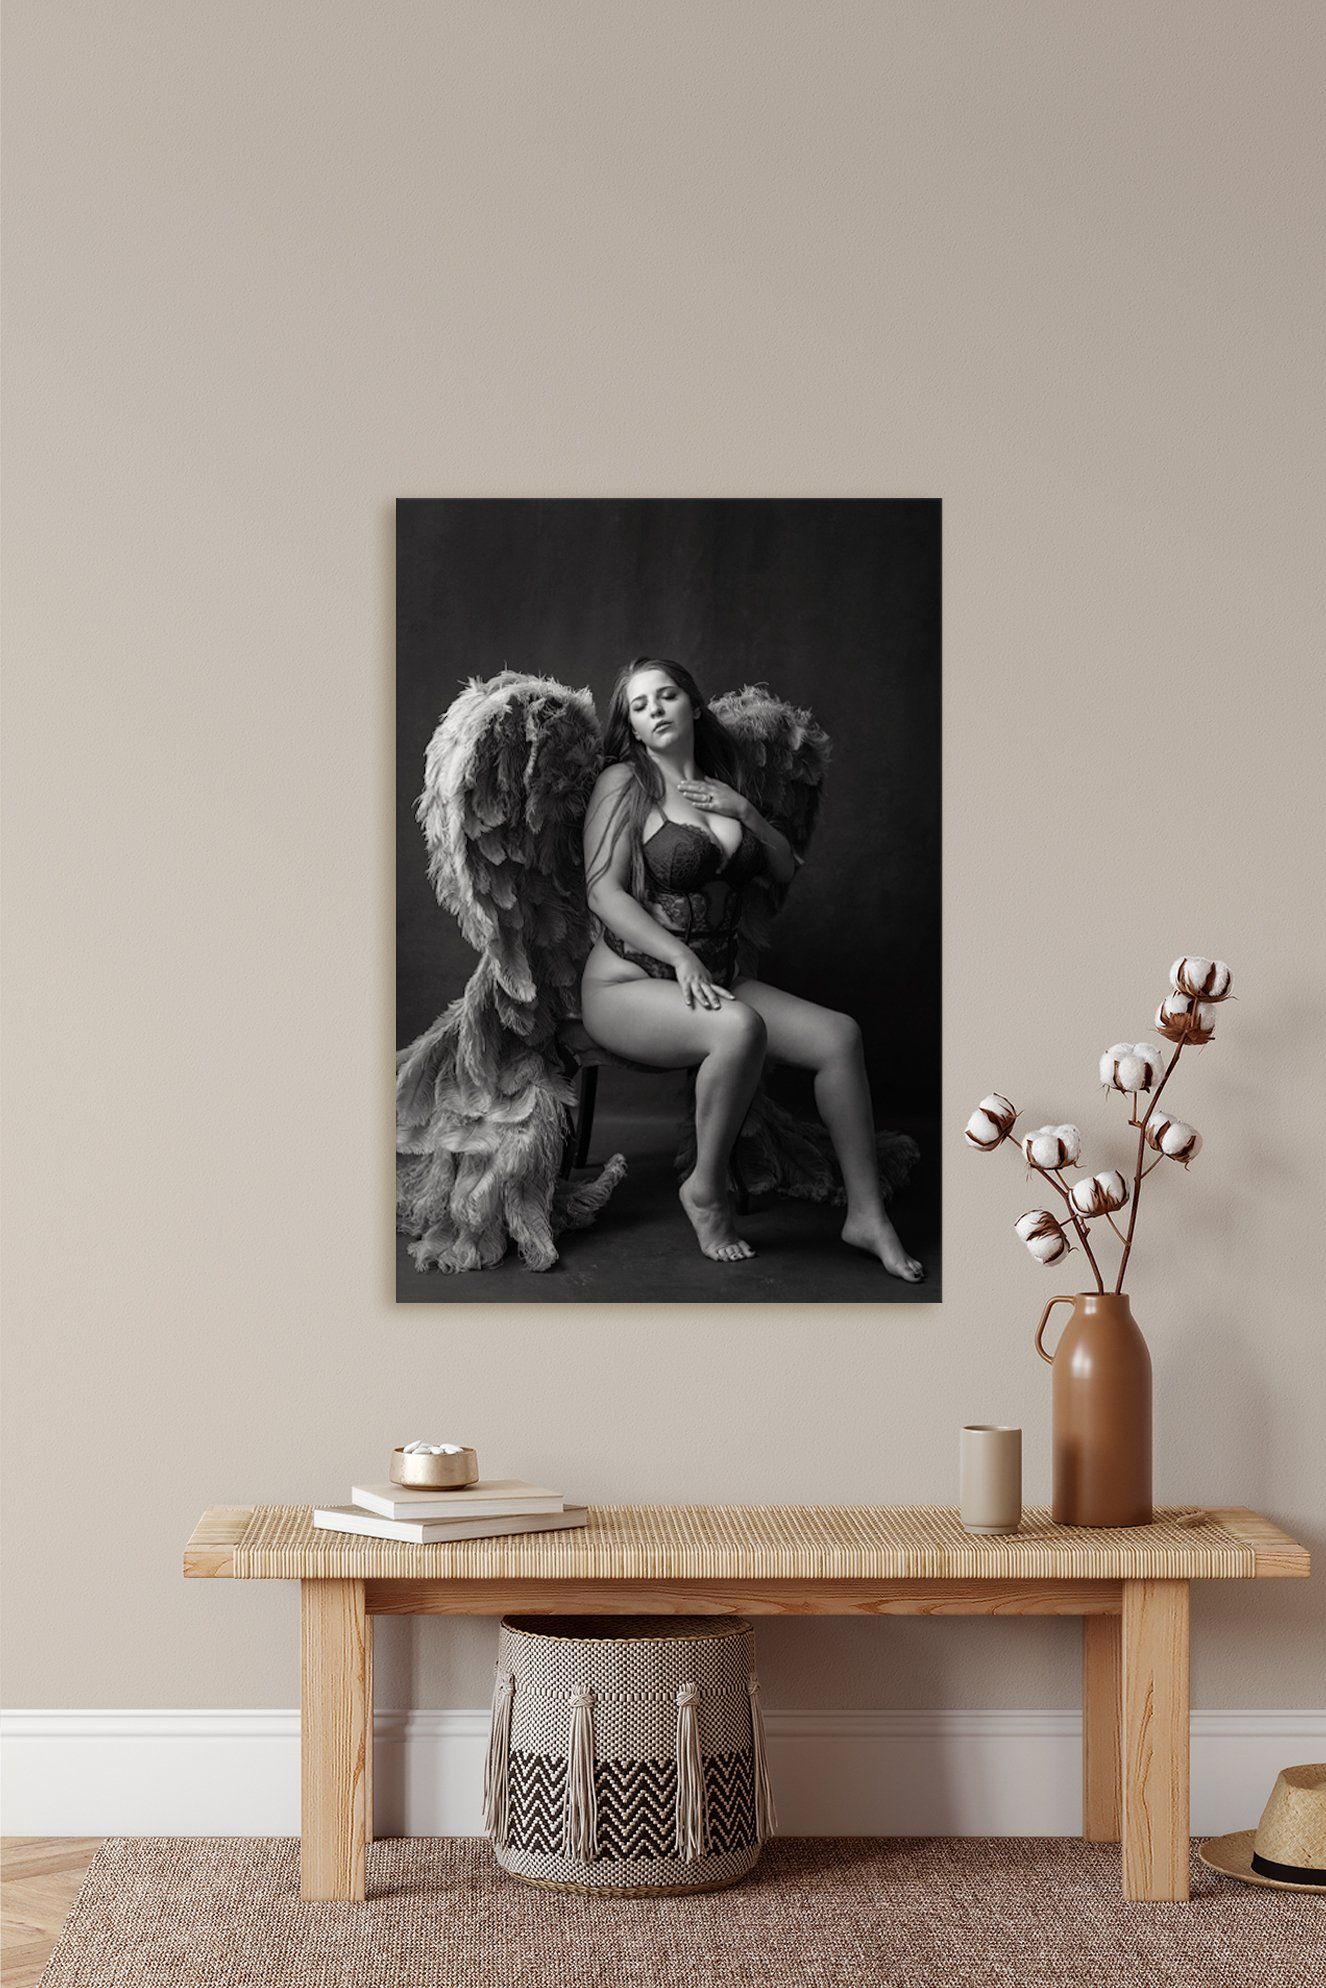 Black & white photo print of angel on rock displayed on wall.